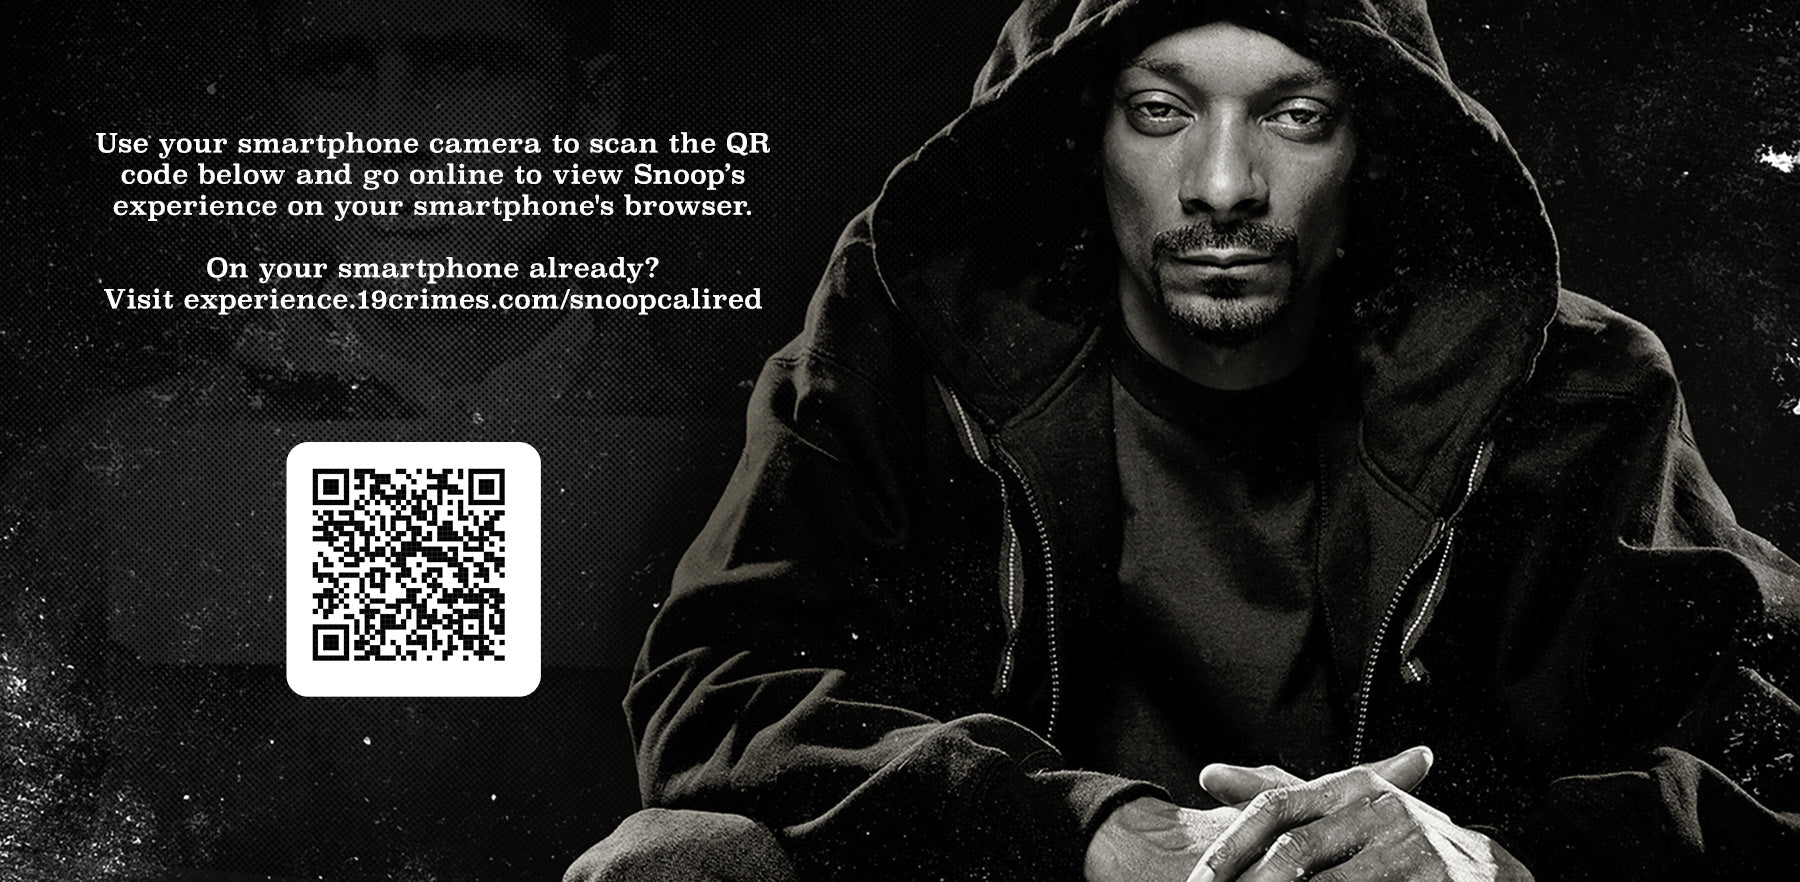 go to experience.19crimes.com/snoopcalired on your smart phone browser